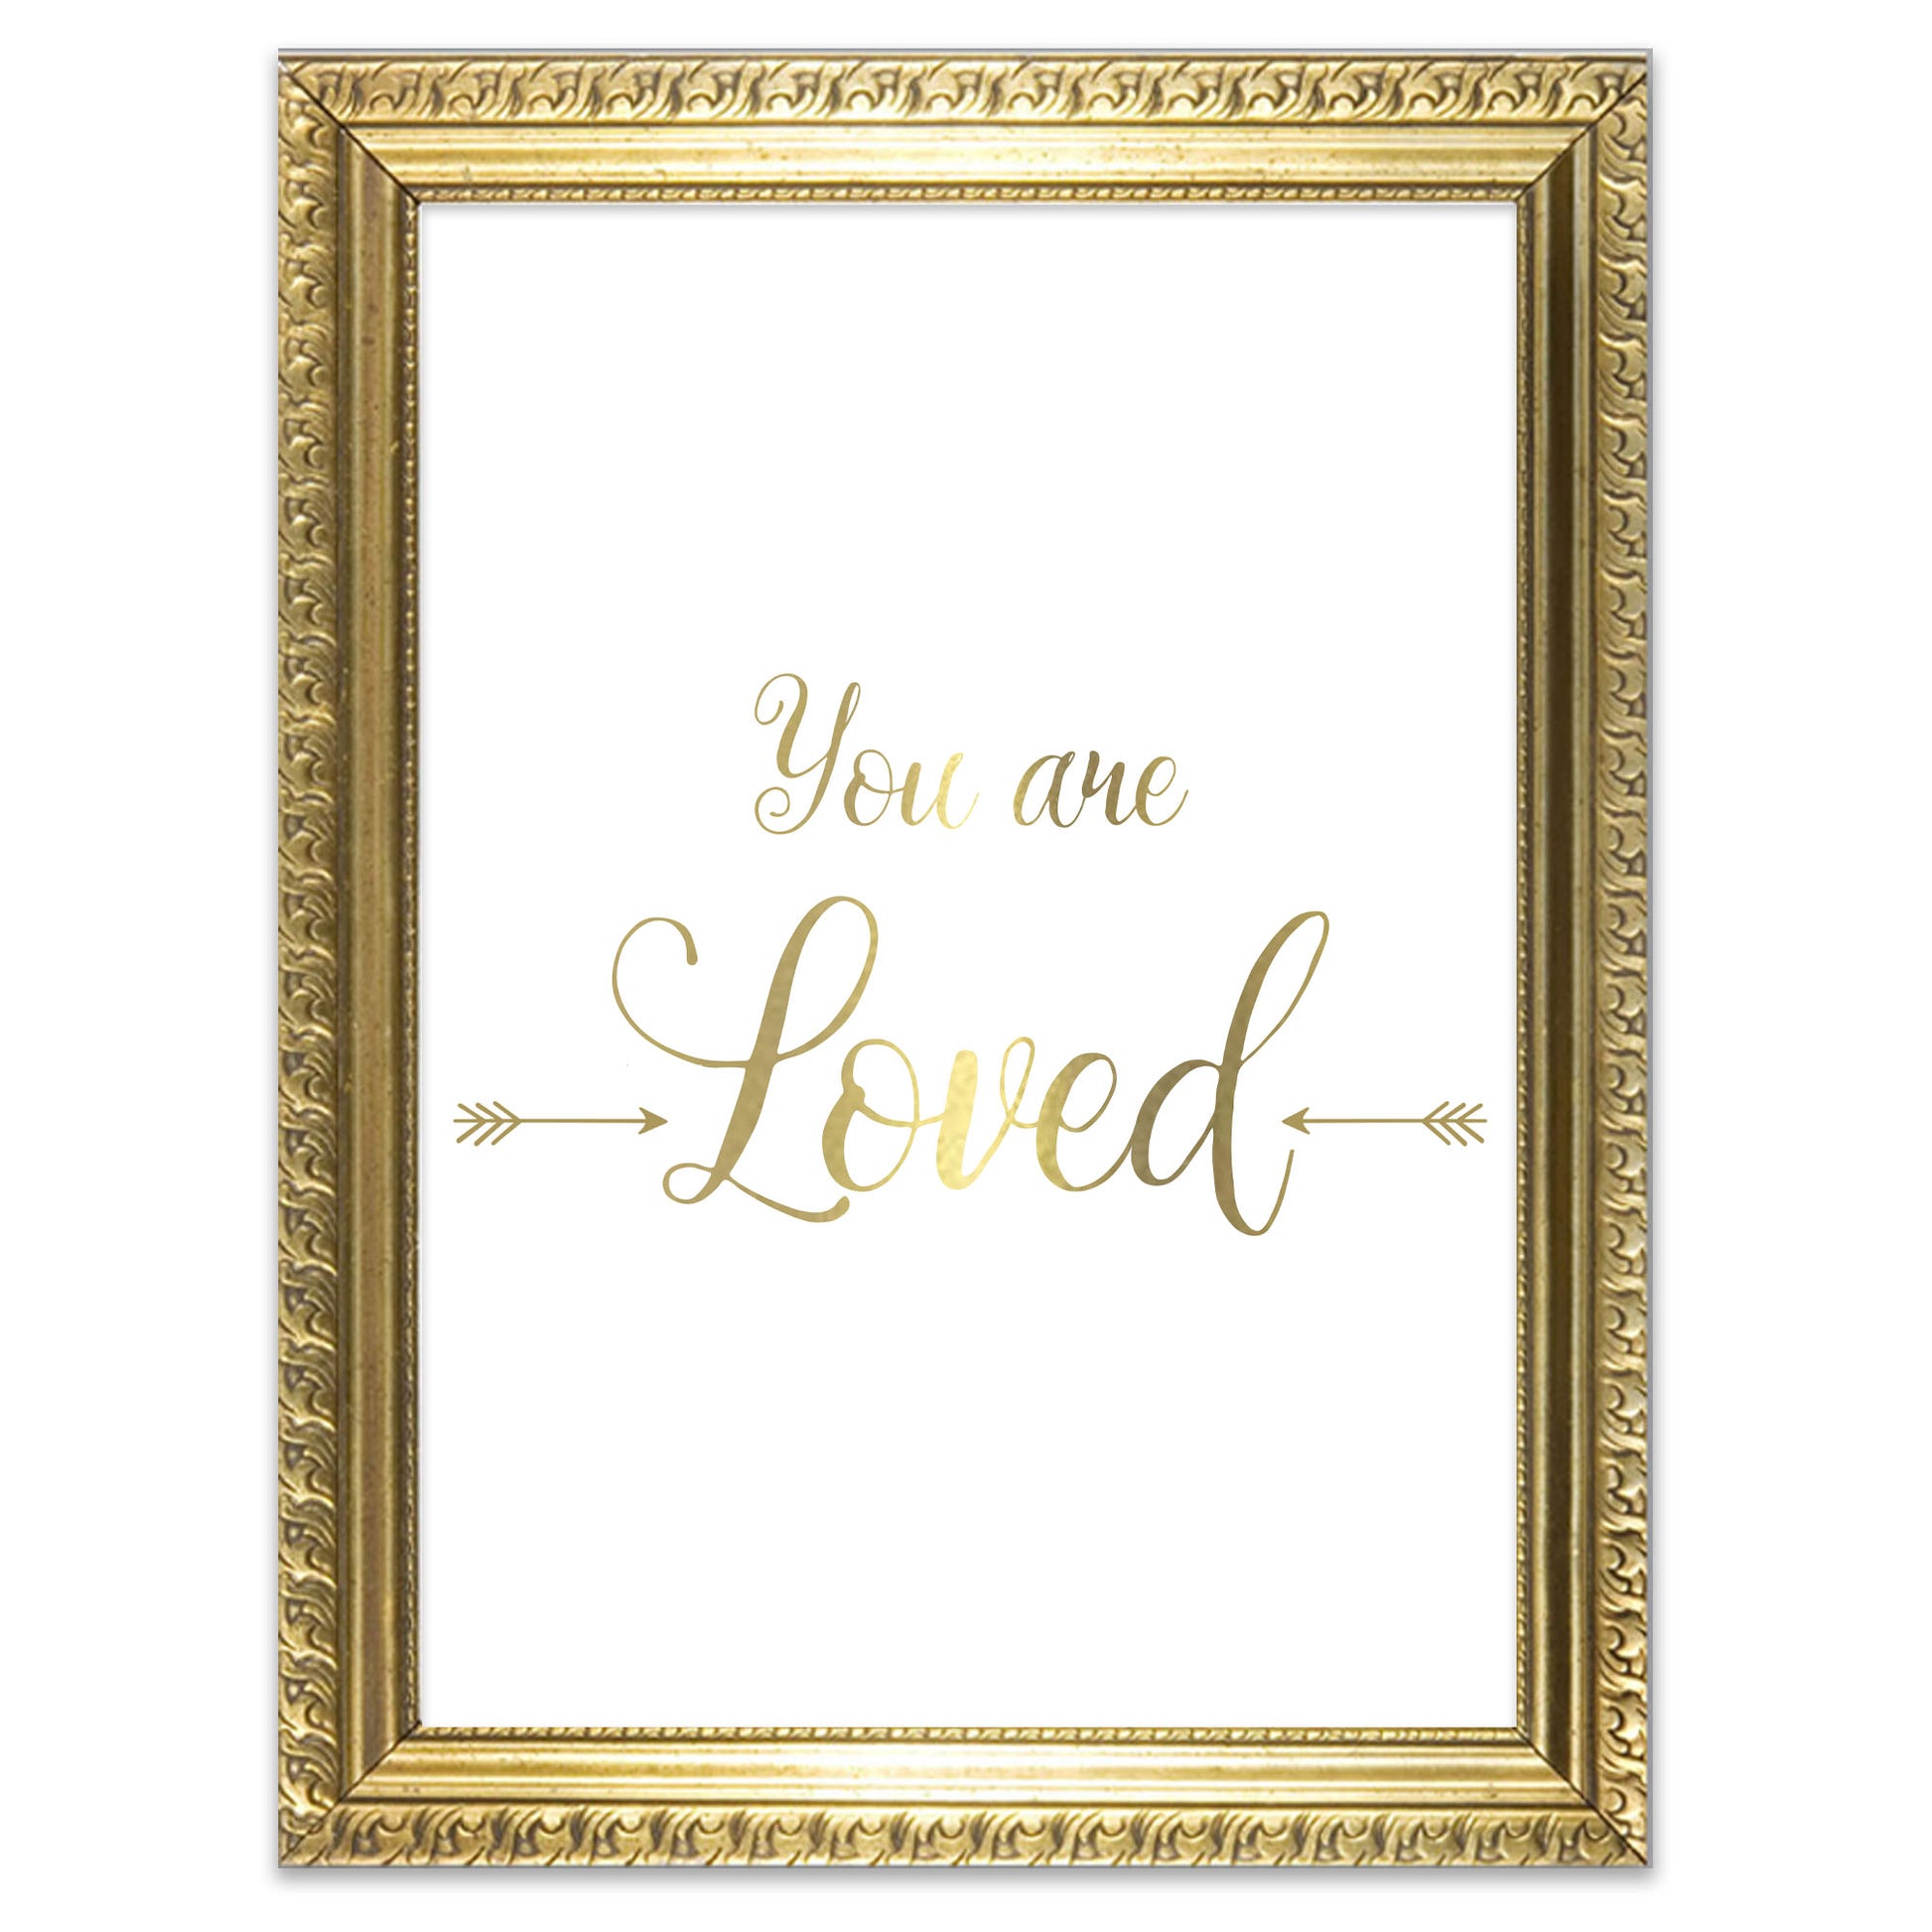 Girls pink & gold bedroom quote art posters